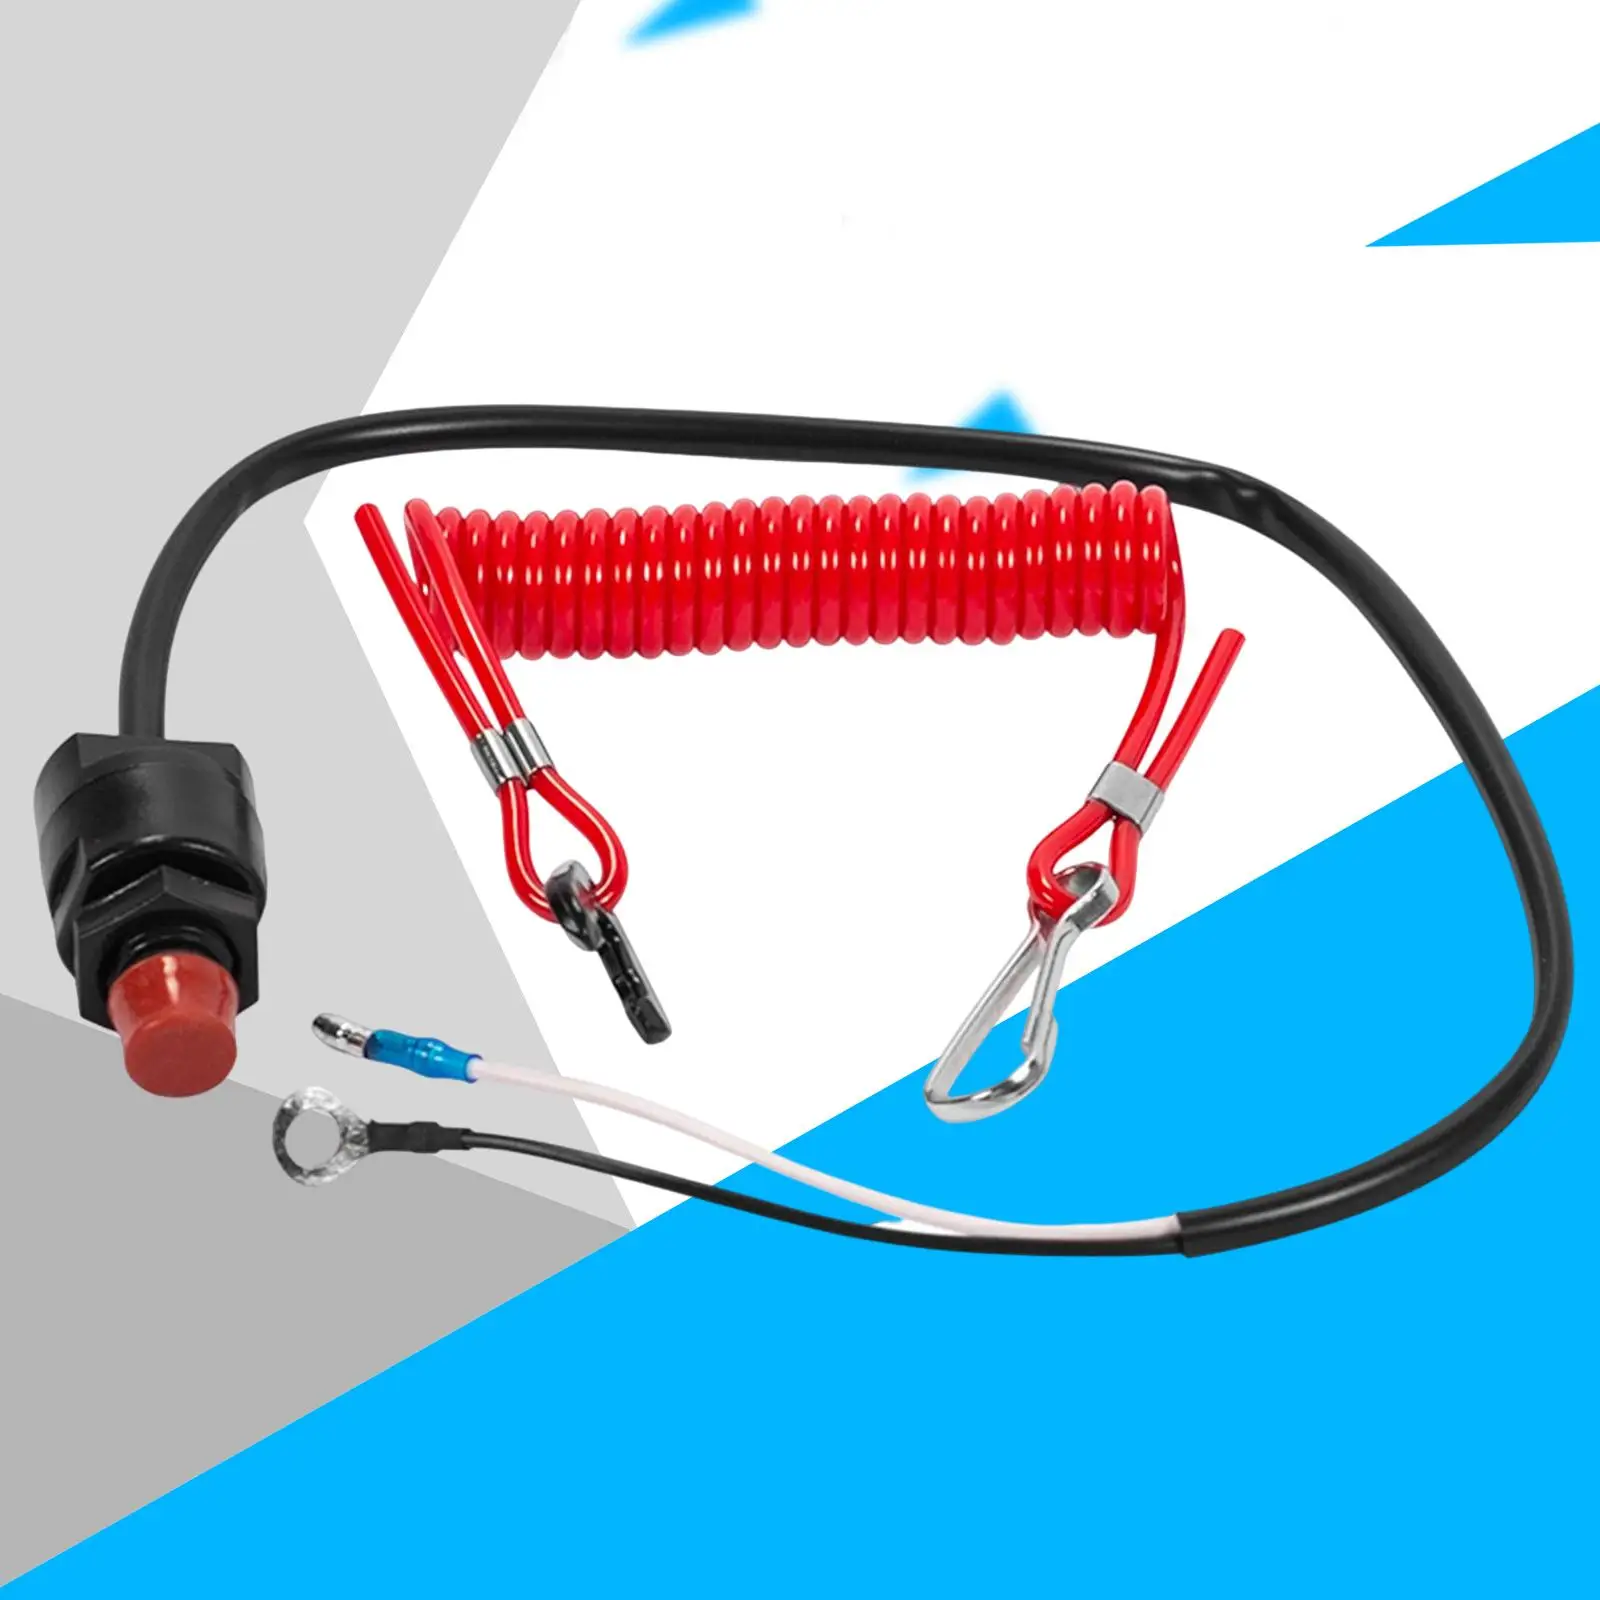 Engine Stop Kill Switch Cut Out Strap Cord Suit Key Lanyard Safety Tether Lanyard Flameout Switch for Boat Outboard Motor